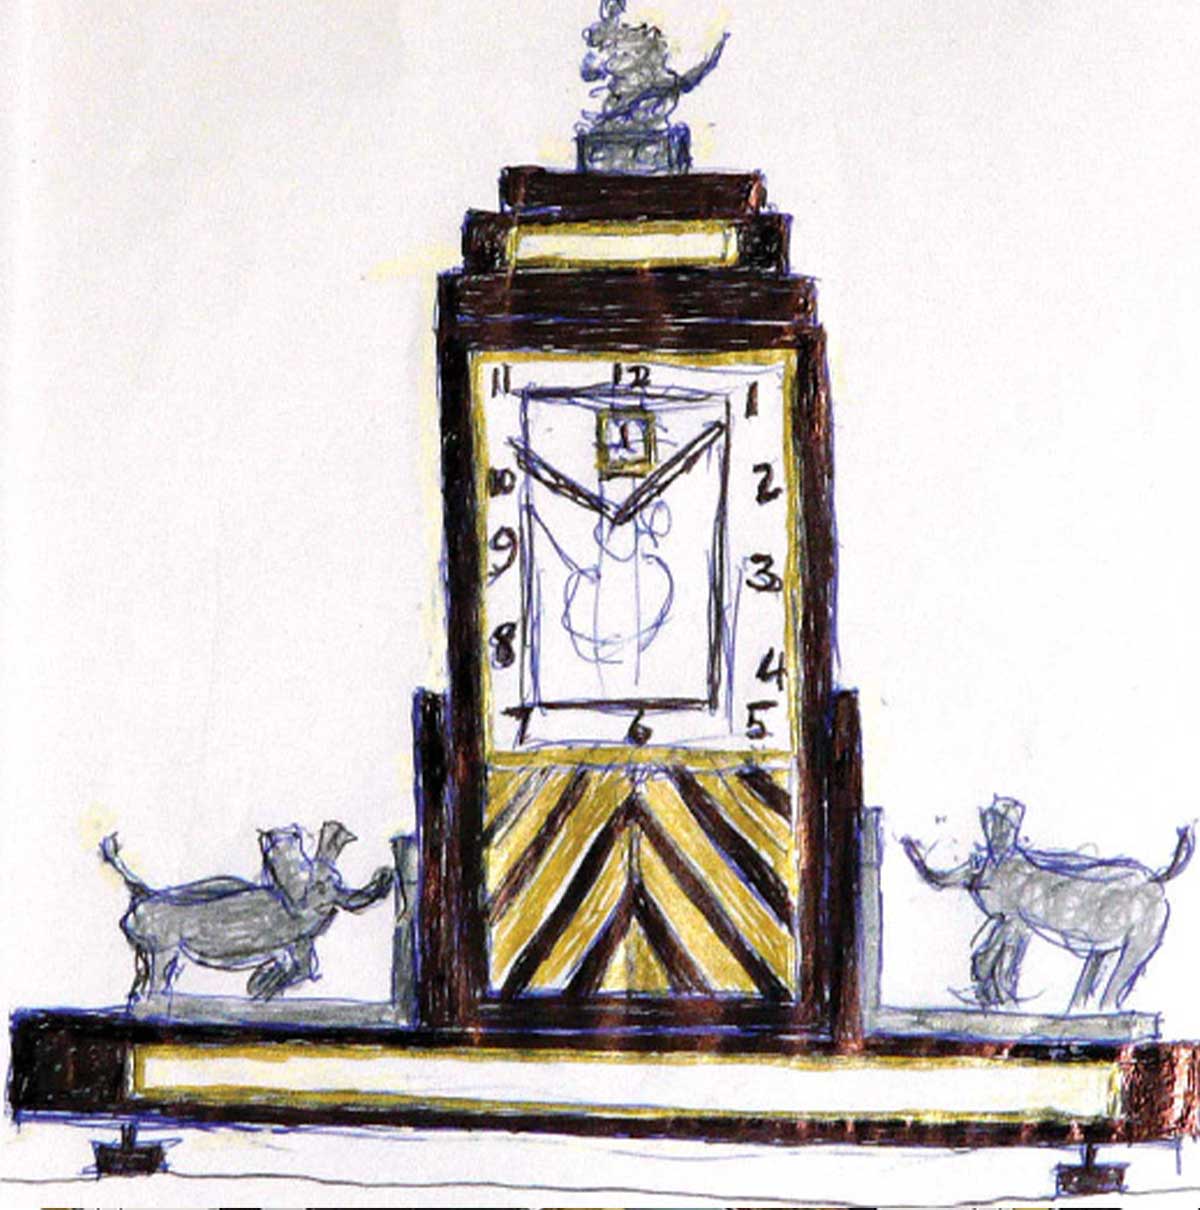 Hand-drawn color illustration of the finished version of the clock